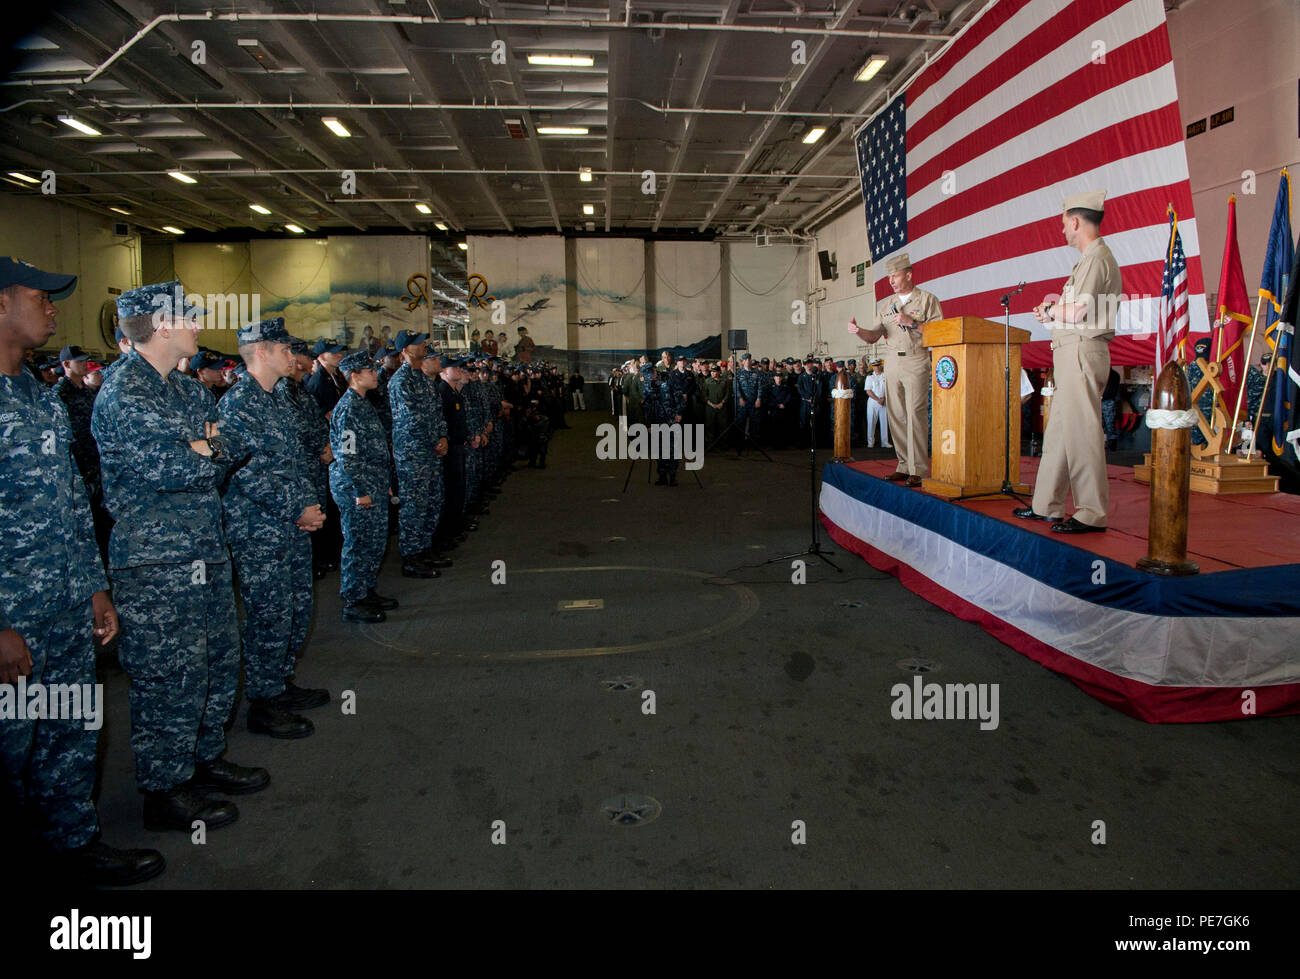 151015-N-OT964-235 YOKOSUKA (Oct. 15, 2015) Master Chief Petty Officer of the Navy (MCPON) Mike Stevens and Chief of Naval Operations (CNO) Adm. John Richardson answer Sailors questions during an all hands call aboard the aircraft carrier USS Ronald Reagan (CVN 76). Stevens and Richardson are in Japan as part of their round-the-world tour, visiting Sailors in Hawaii, South Korea and Bahrain. (U.S. Navy photo by Mass Communication Specialist 1st Class Martin L. Carey/Released) Stock Photo